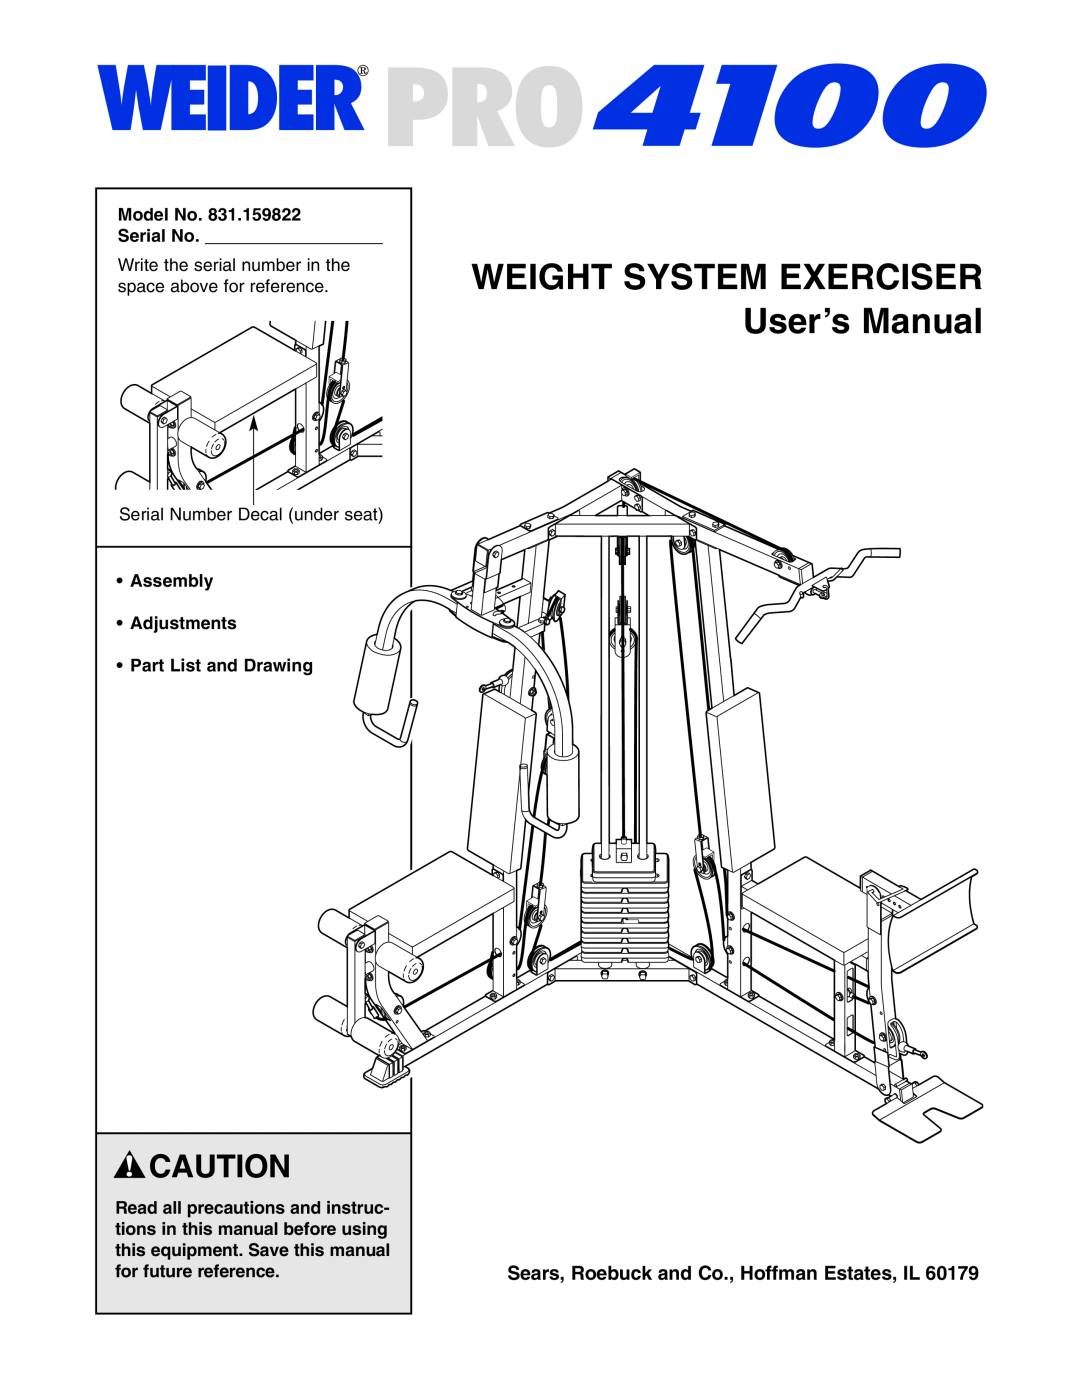 Weider 831.159822 user manual WEIGHT SYSTEM EXERCISER User’s Manual, Sears, Roebuck and Co., Hoffman Estates, IL 